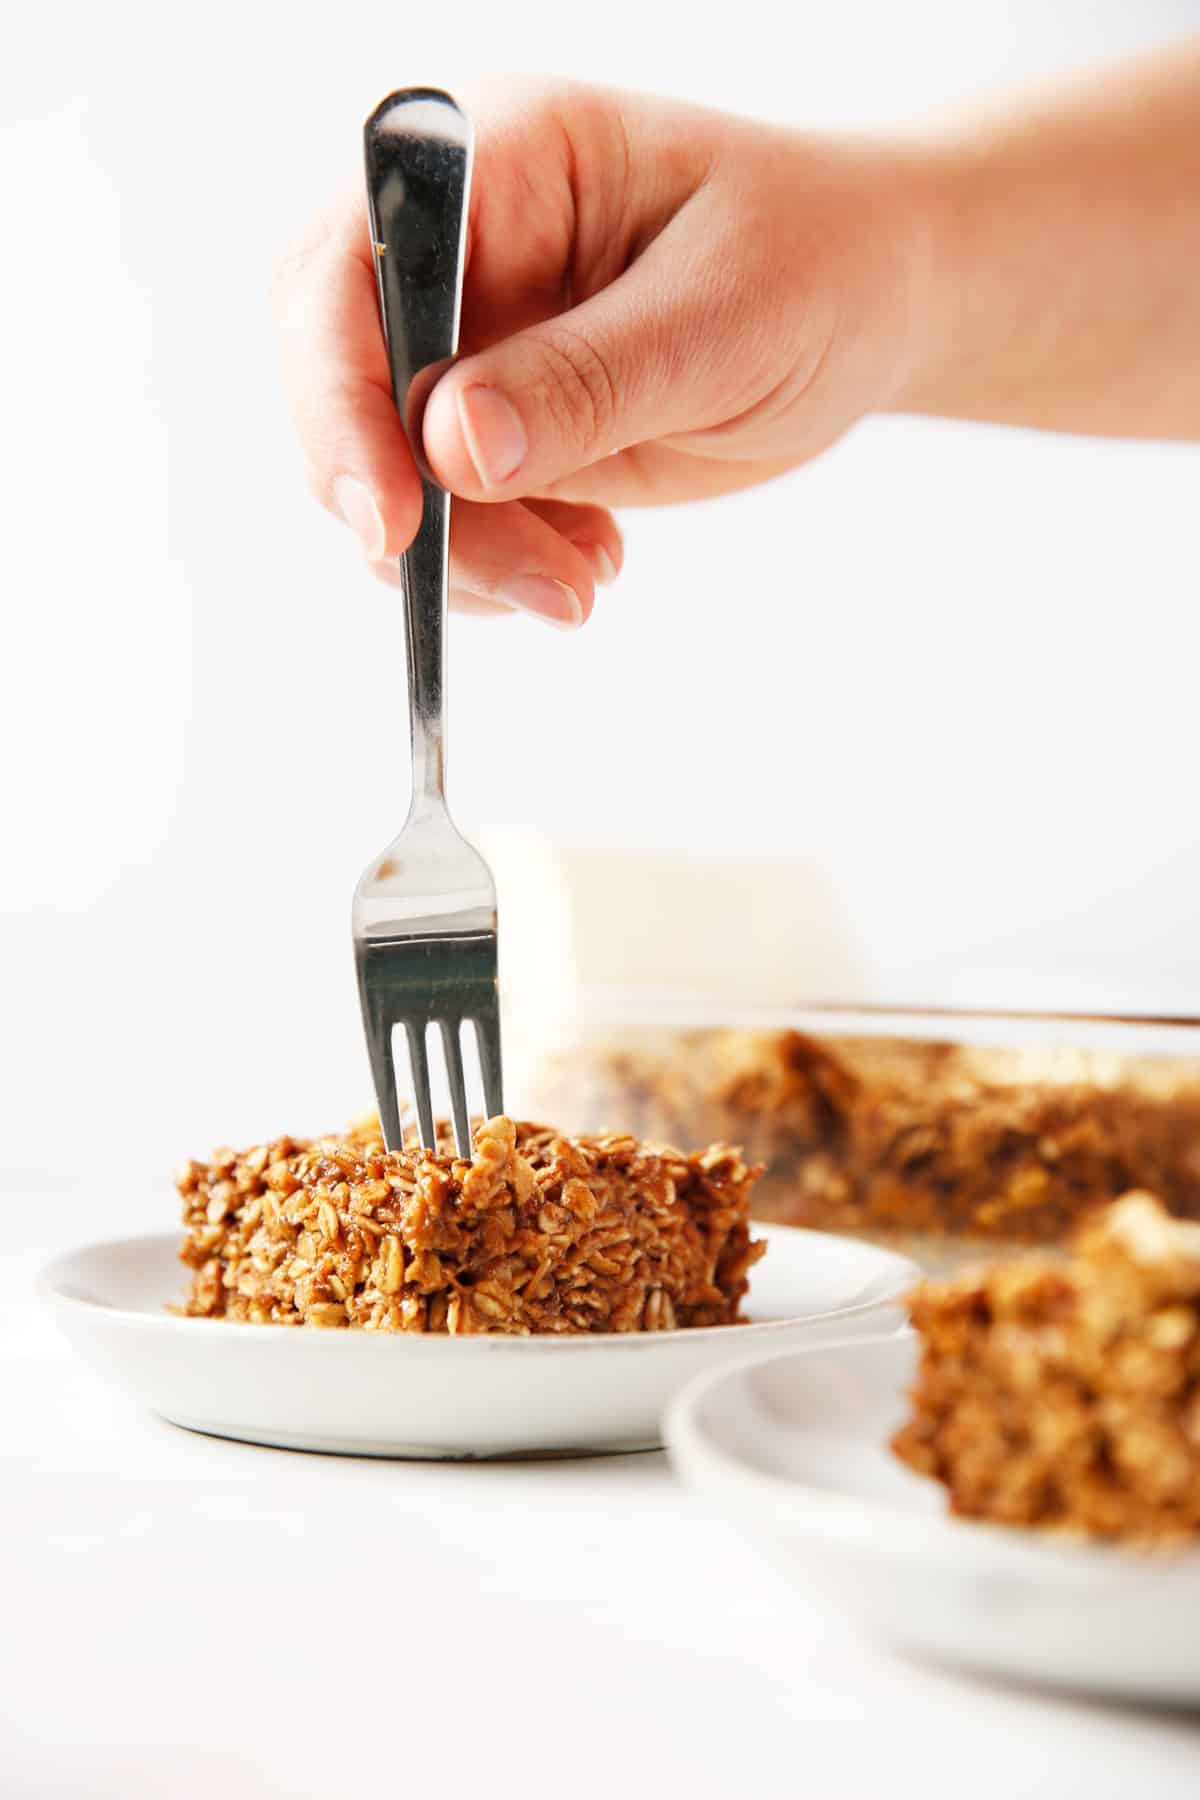 Holding a fork in one hand, place the toasted gingerbread oatmeal in place.